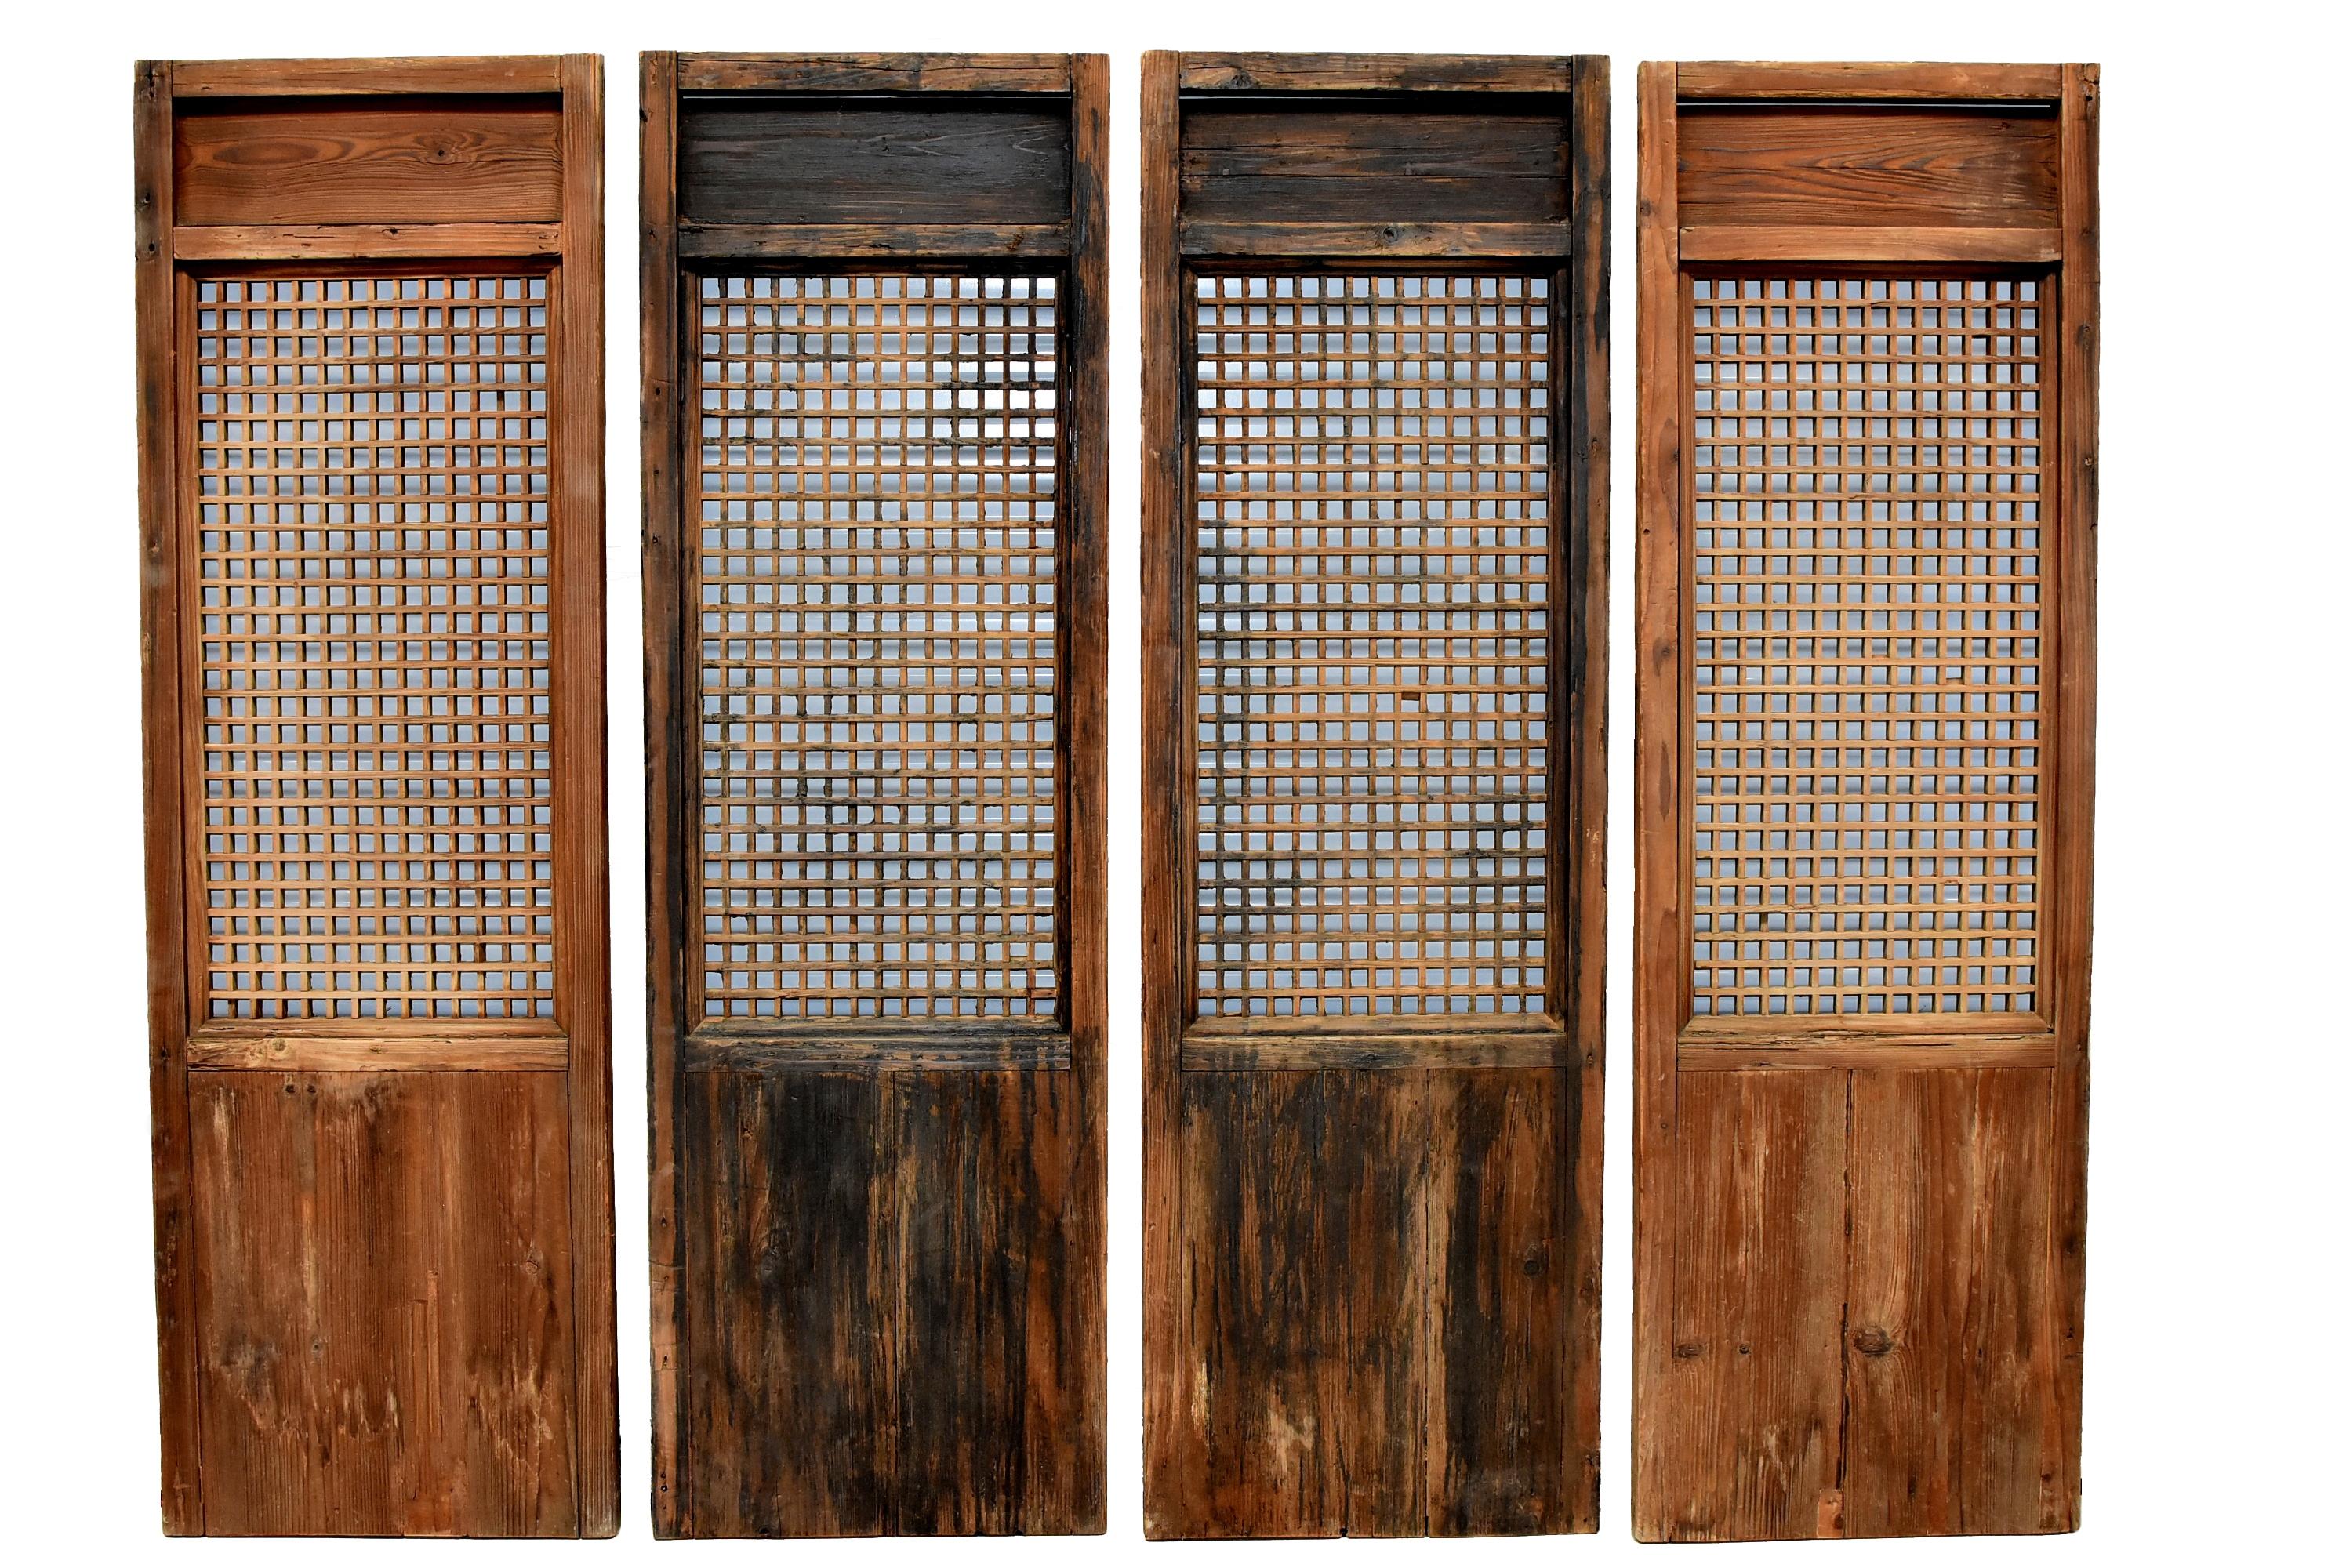 This is a set of beautiful, all original, rare, 19th-early 20th century Ming style Chinese antique window screens. The simple, elegant design is timeless. The main section of the screen is formed by a small cube design, which are created by joining